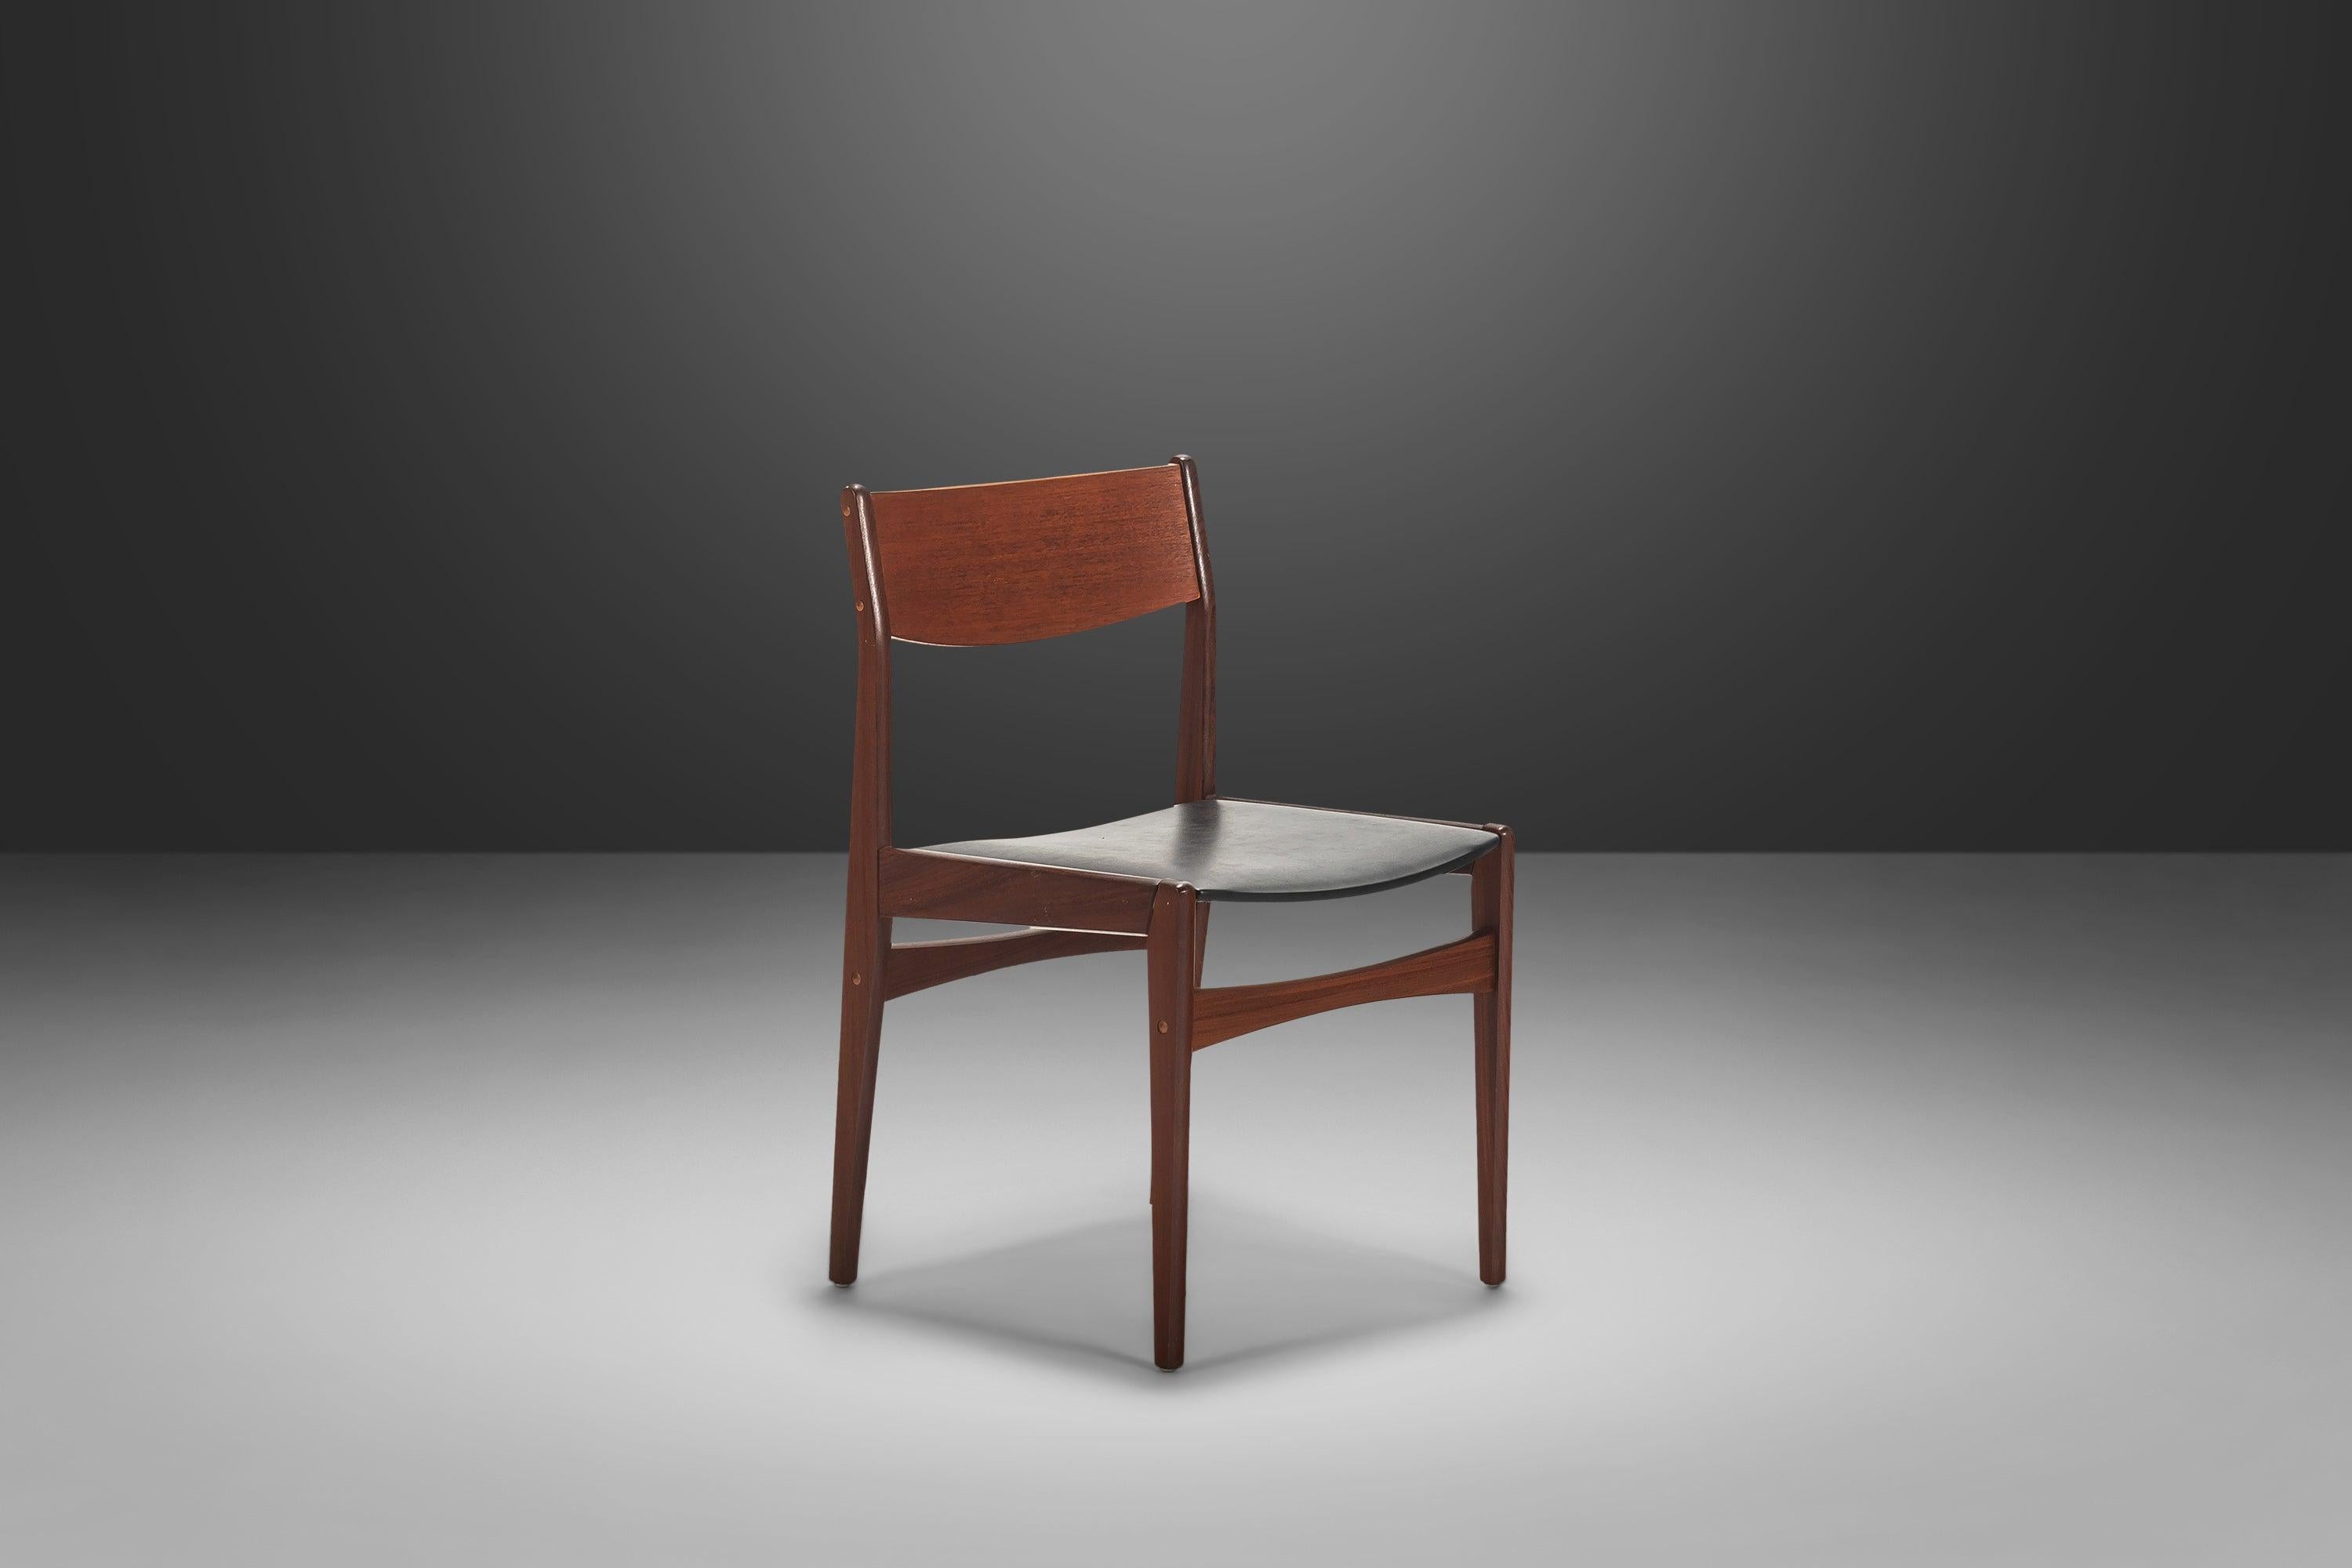 This set of understated dining chairs by Poul Volther are in 100% original, vintage condition and ideal for collectors searching for a completely untouched set of authentic Danish pieces. Constructed of solid teak and original naugahyde seats this